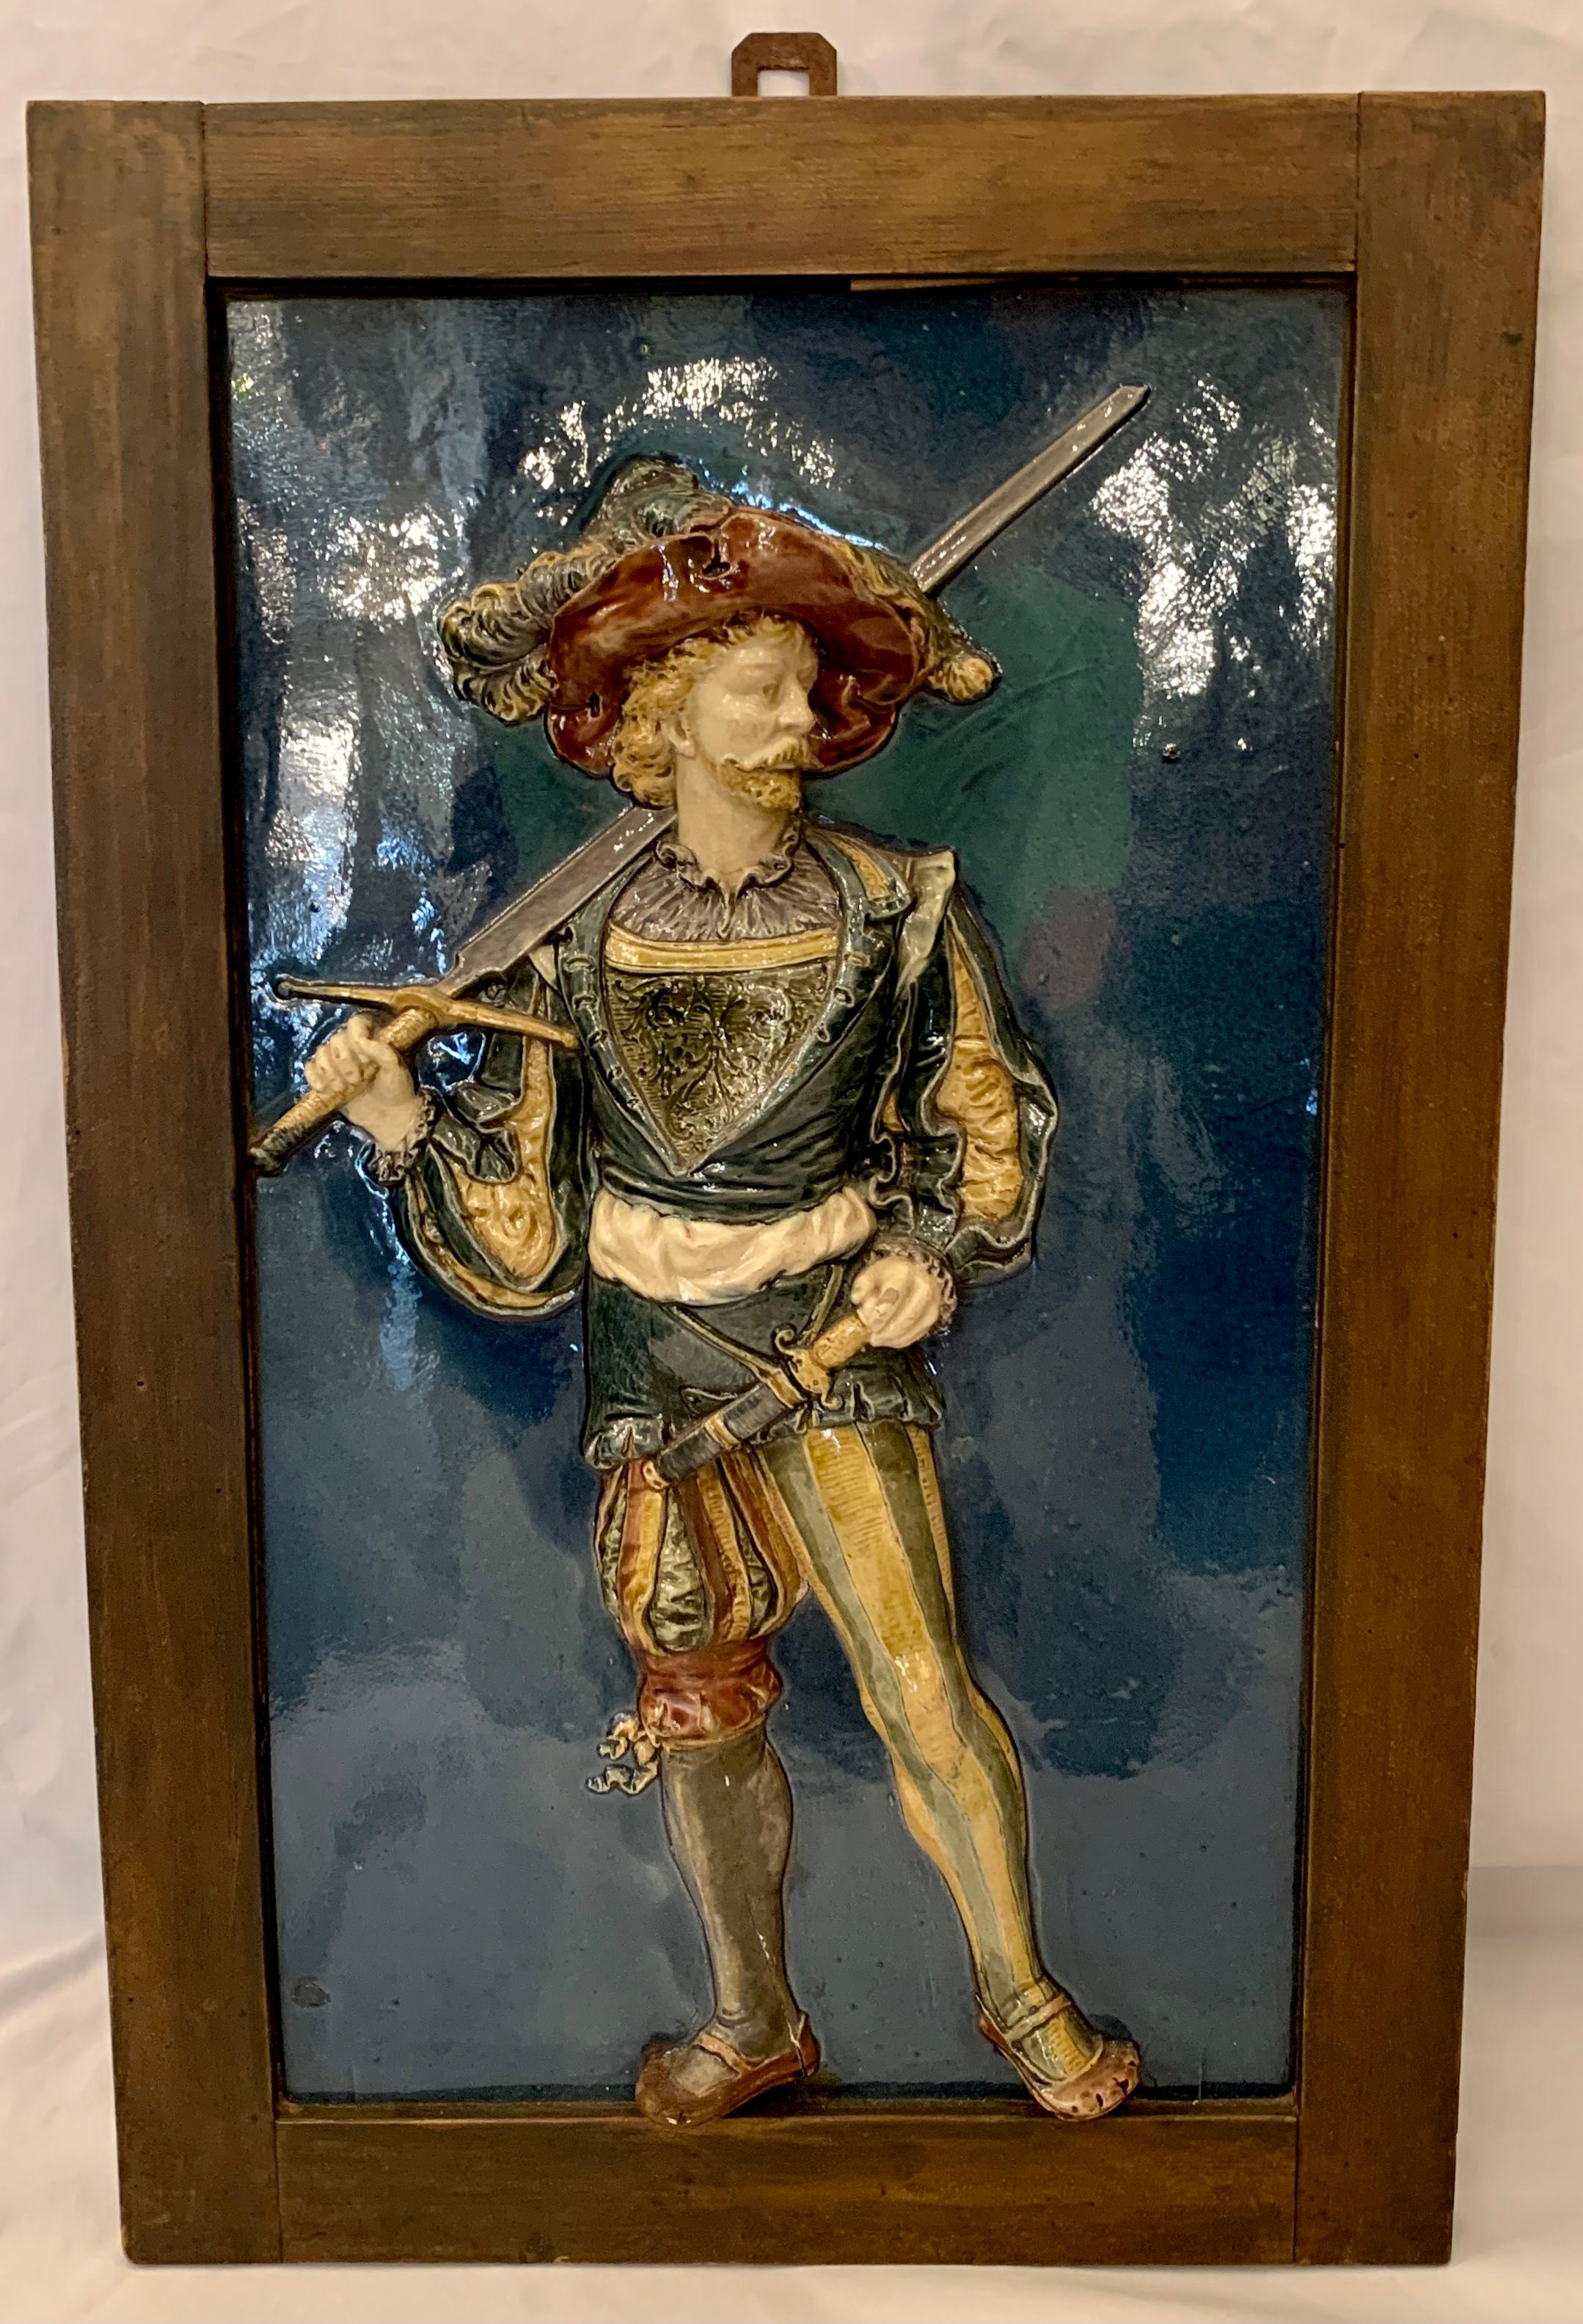 Rare large pair antique French Majolica porcelain tile high relief wall plaques of Louis XIV musketeers, Circa 1900-1910.